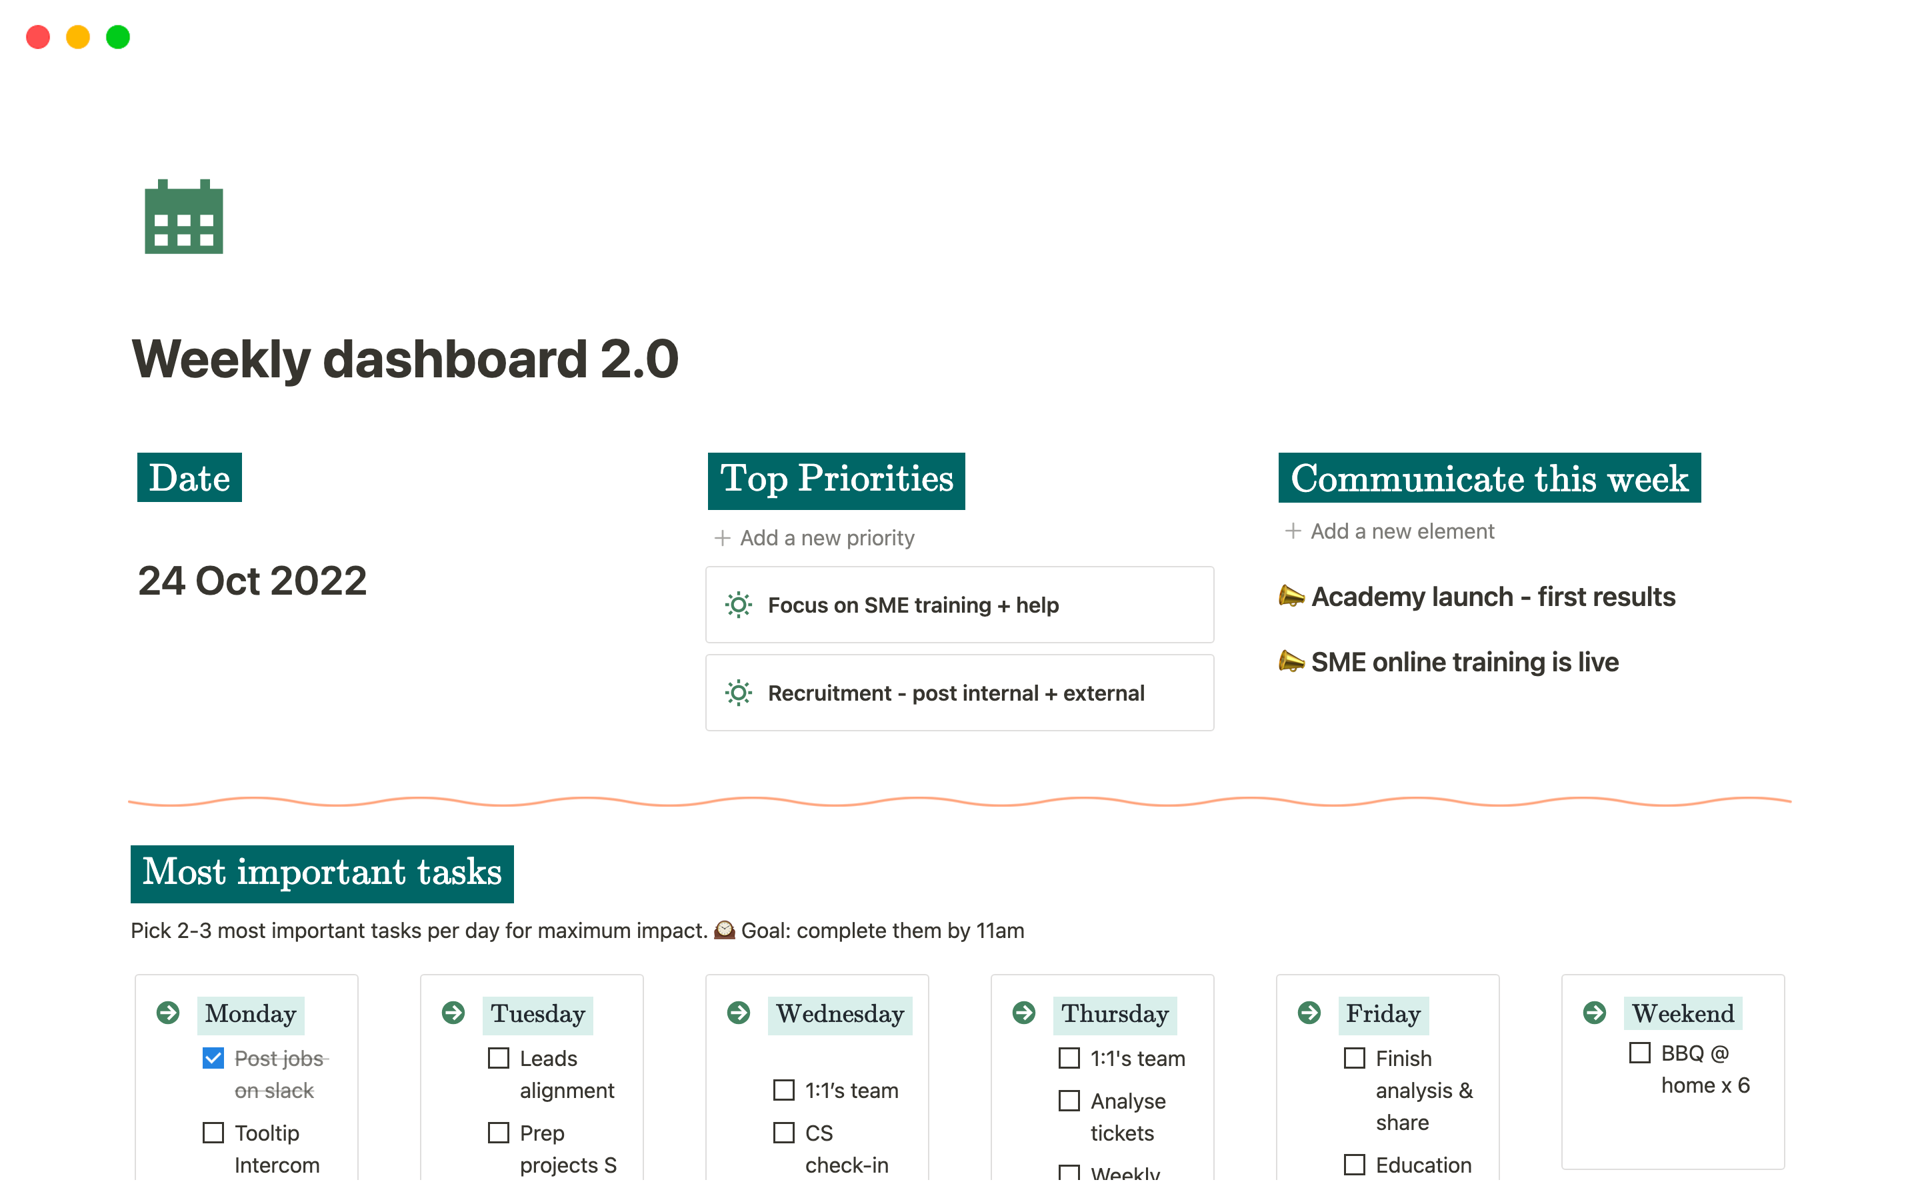 The weekly dashboard serves as your go-to place every day of the week to ensure everything important is done.